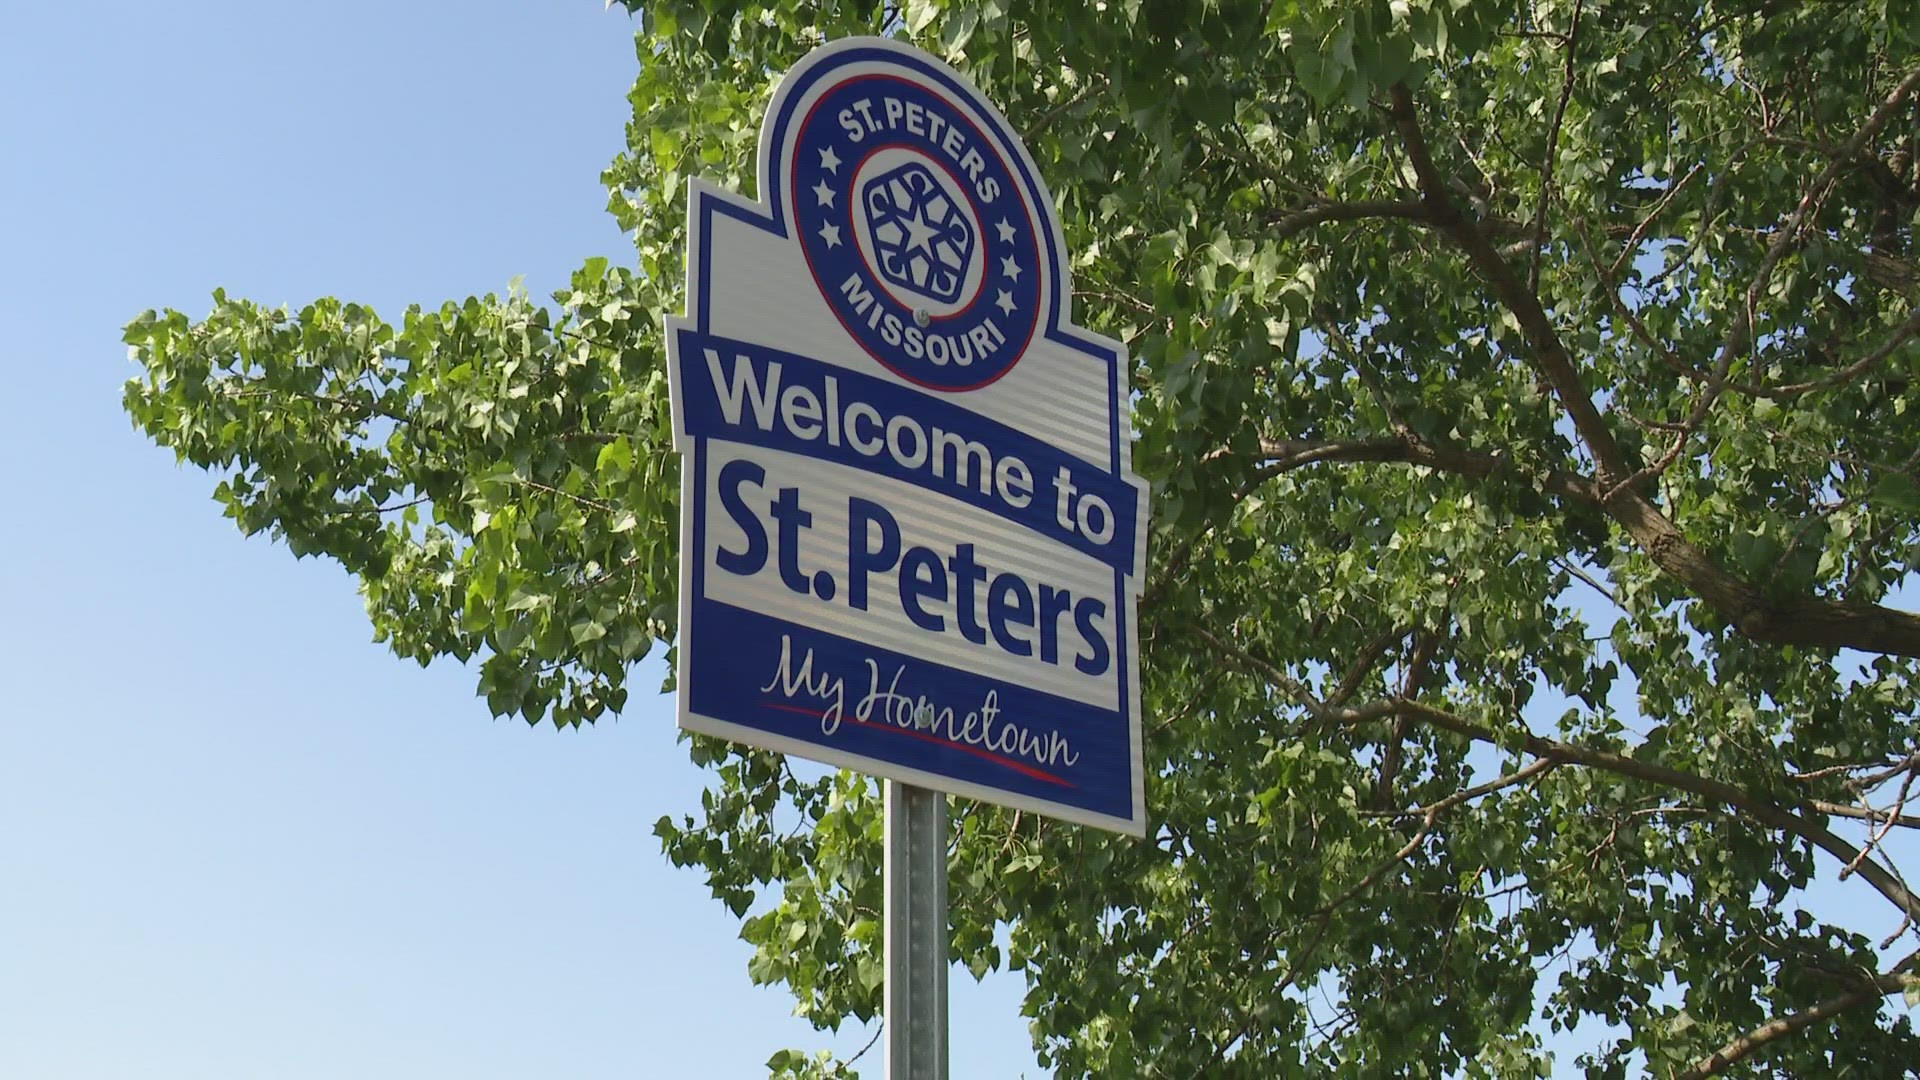 St. Peters Mayor Len Pagano has been reelected four times. He reflects on the city's growth since he took office in 2008.